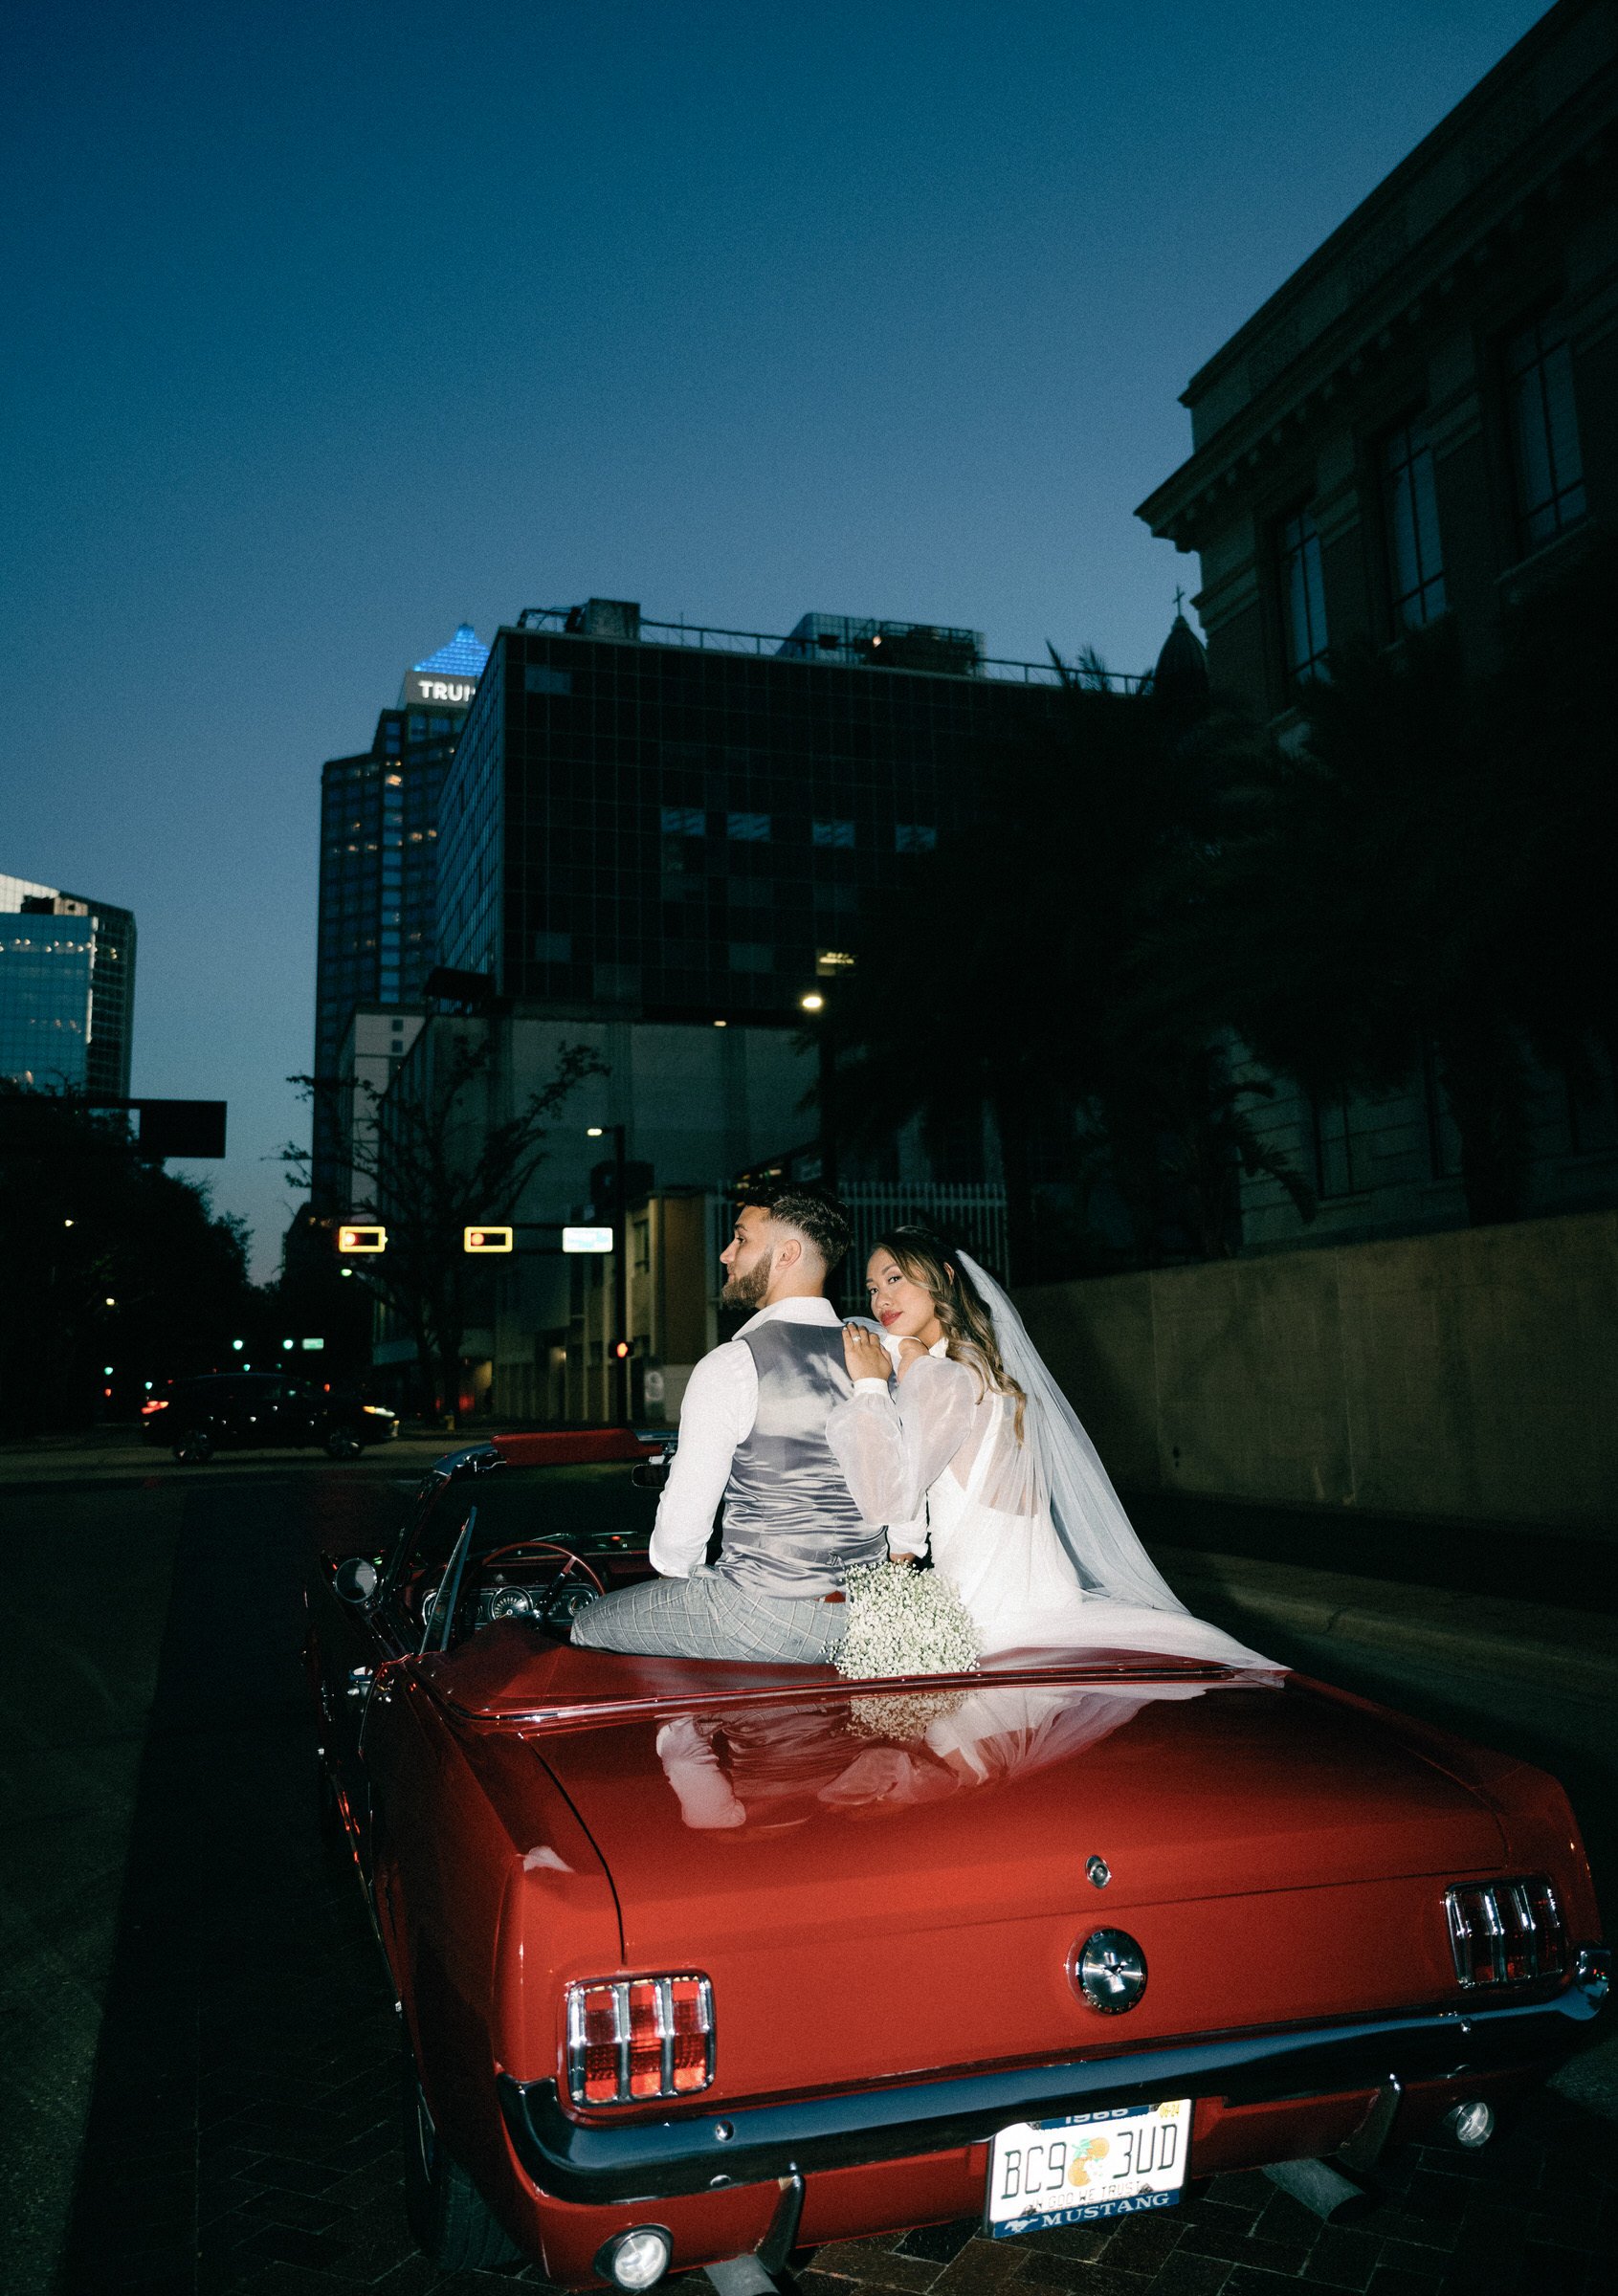 Copyright-Dewitt-for-Love-Photography-M-M-Ybor-City-Tampa-Engagement-Session-103.jpg